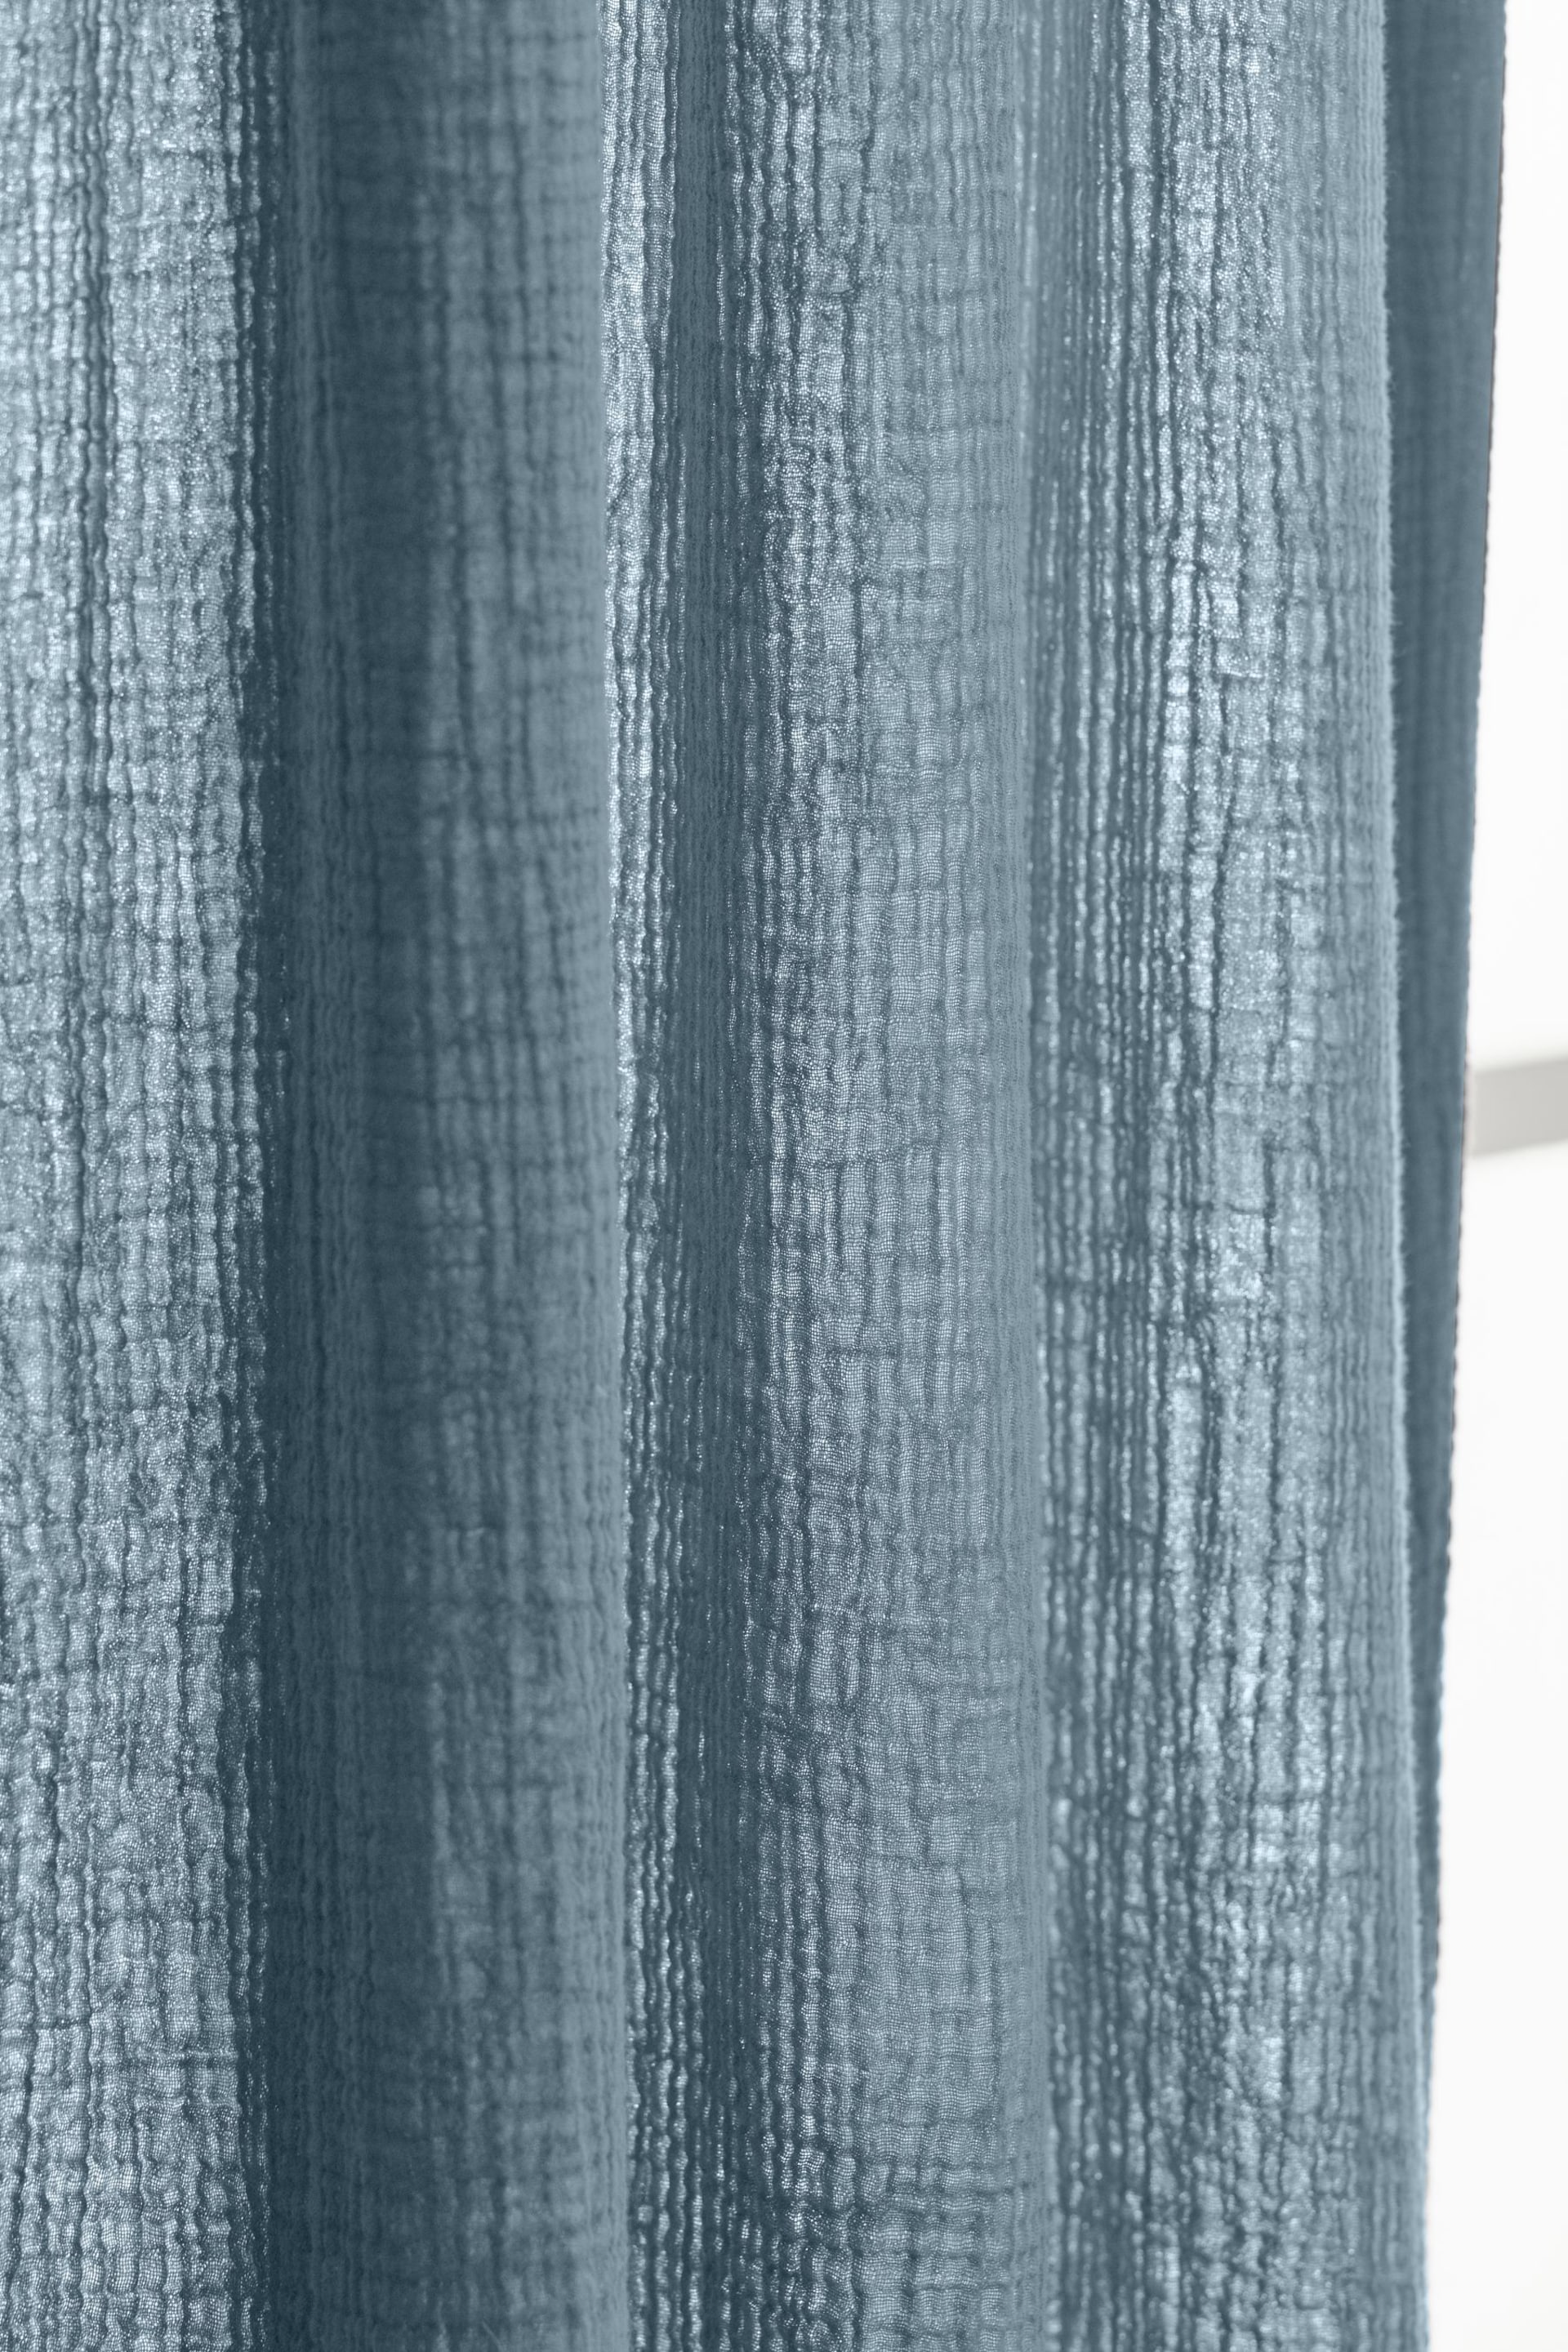 Modern Blue 100% Cotton Crinkle Pencil Pleat Curtains - Image 3 of 5